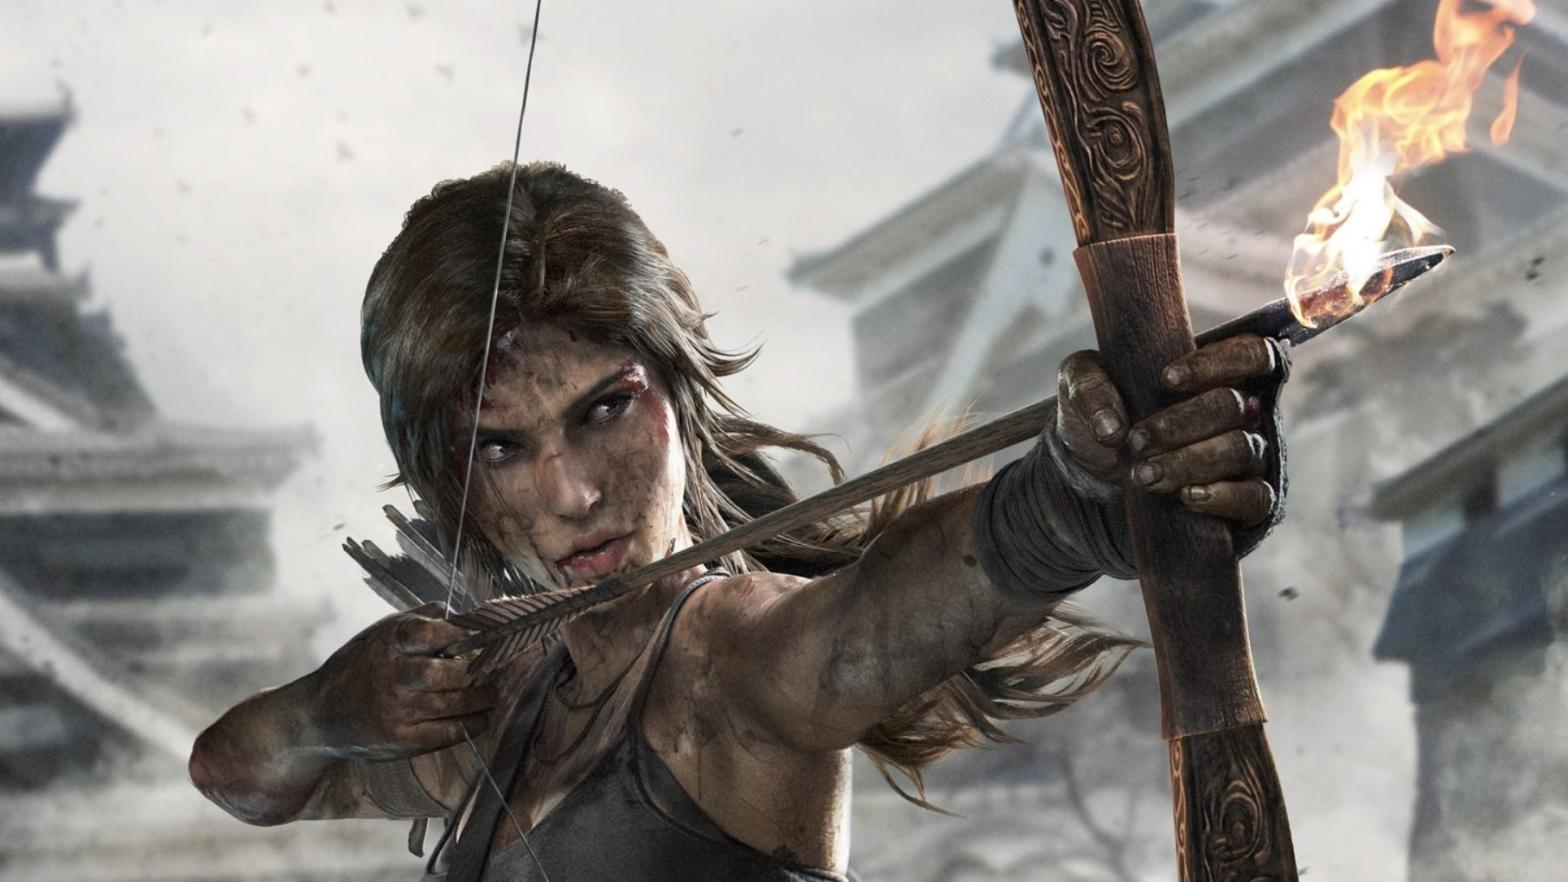 I hope to one day be as brave as Lara Croft. (Image: Crystal Dynamics)